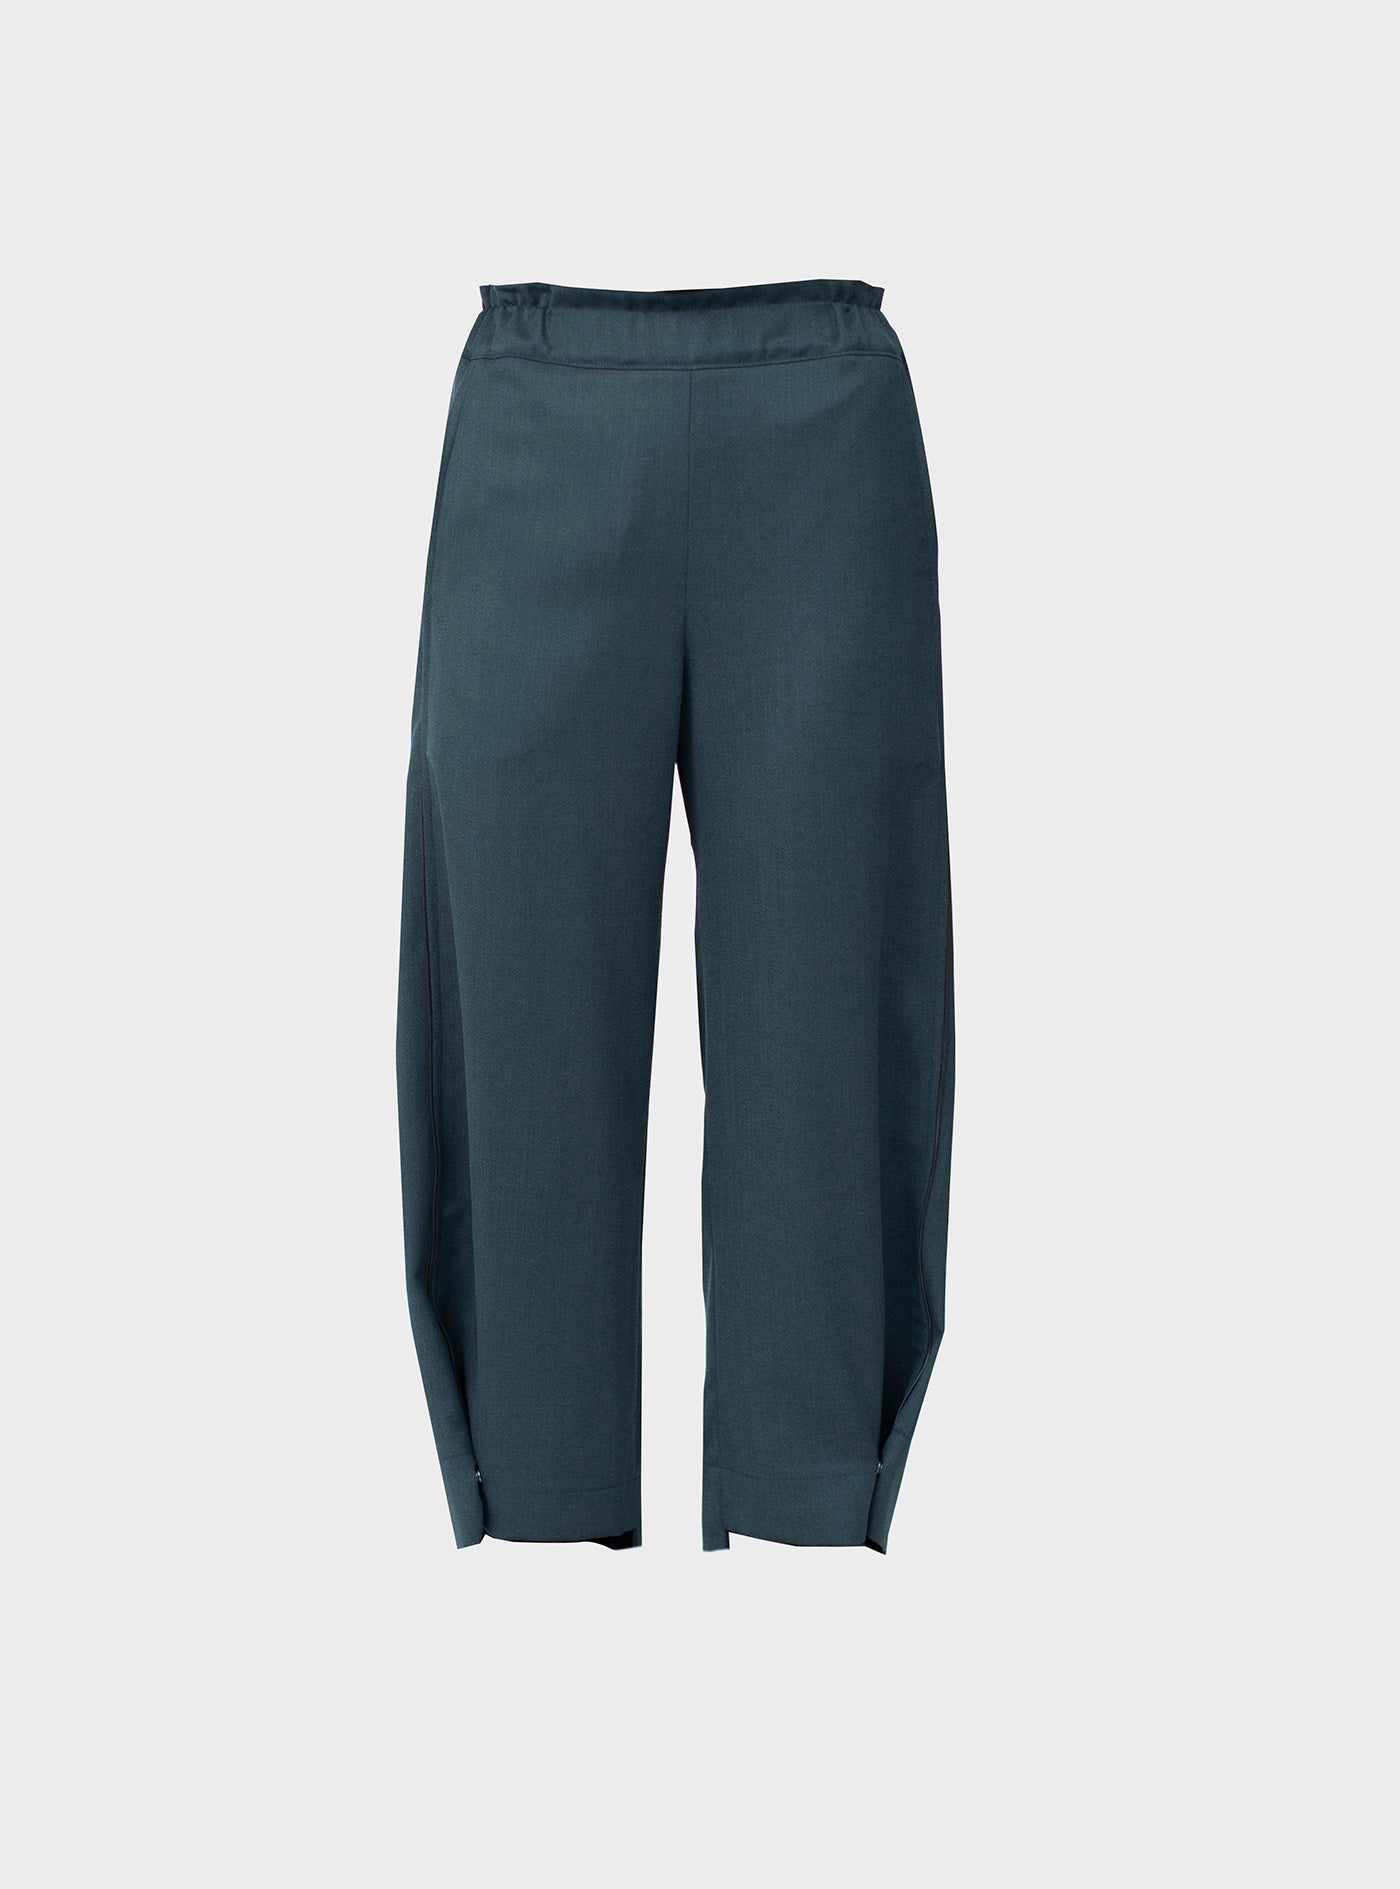 Crop Trousers in peacock green luxury worsted wool from Savile Row, with  piping